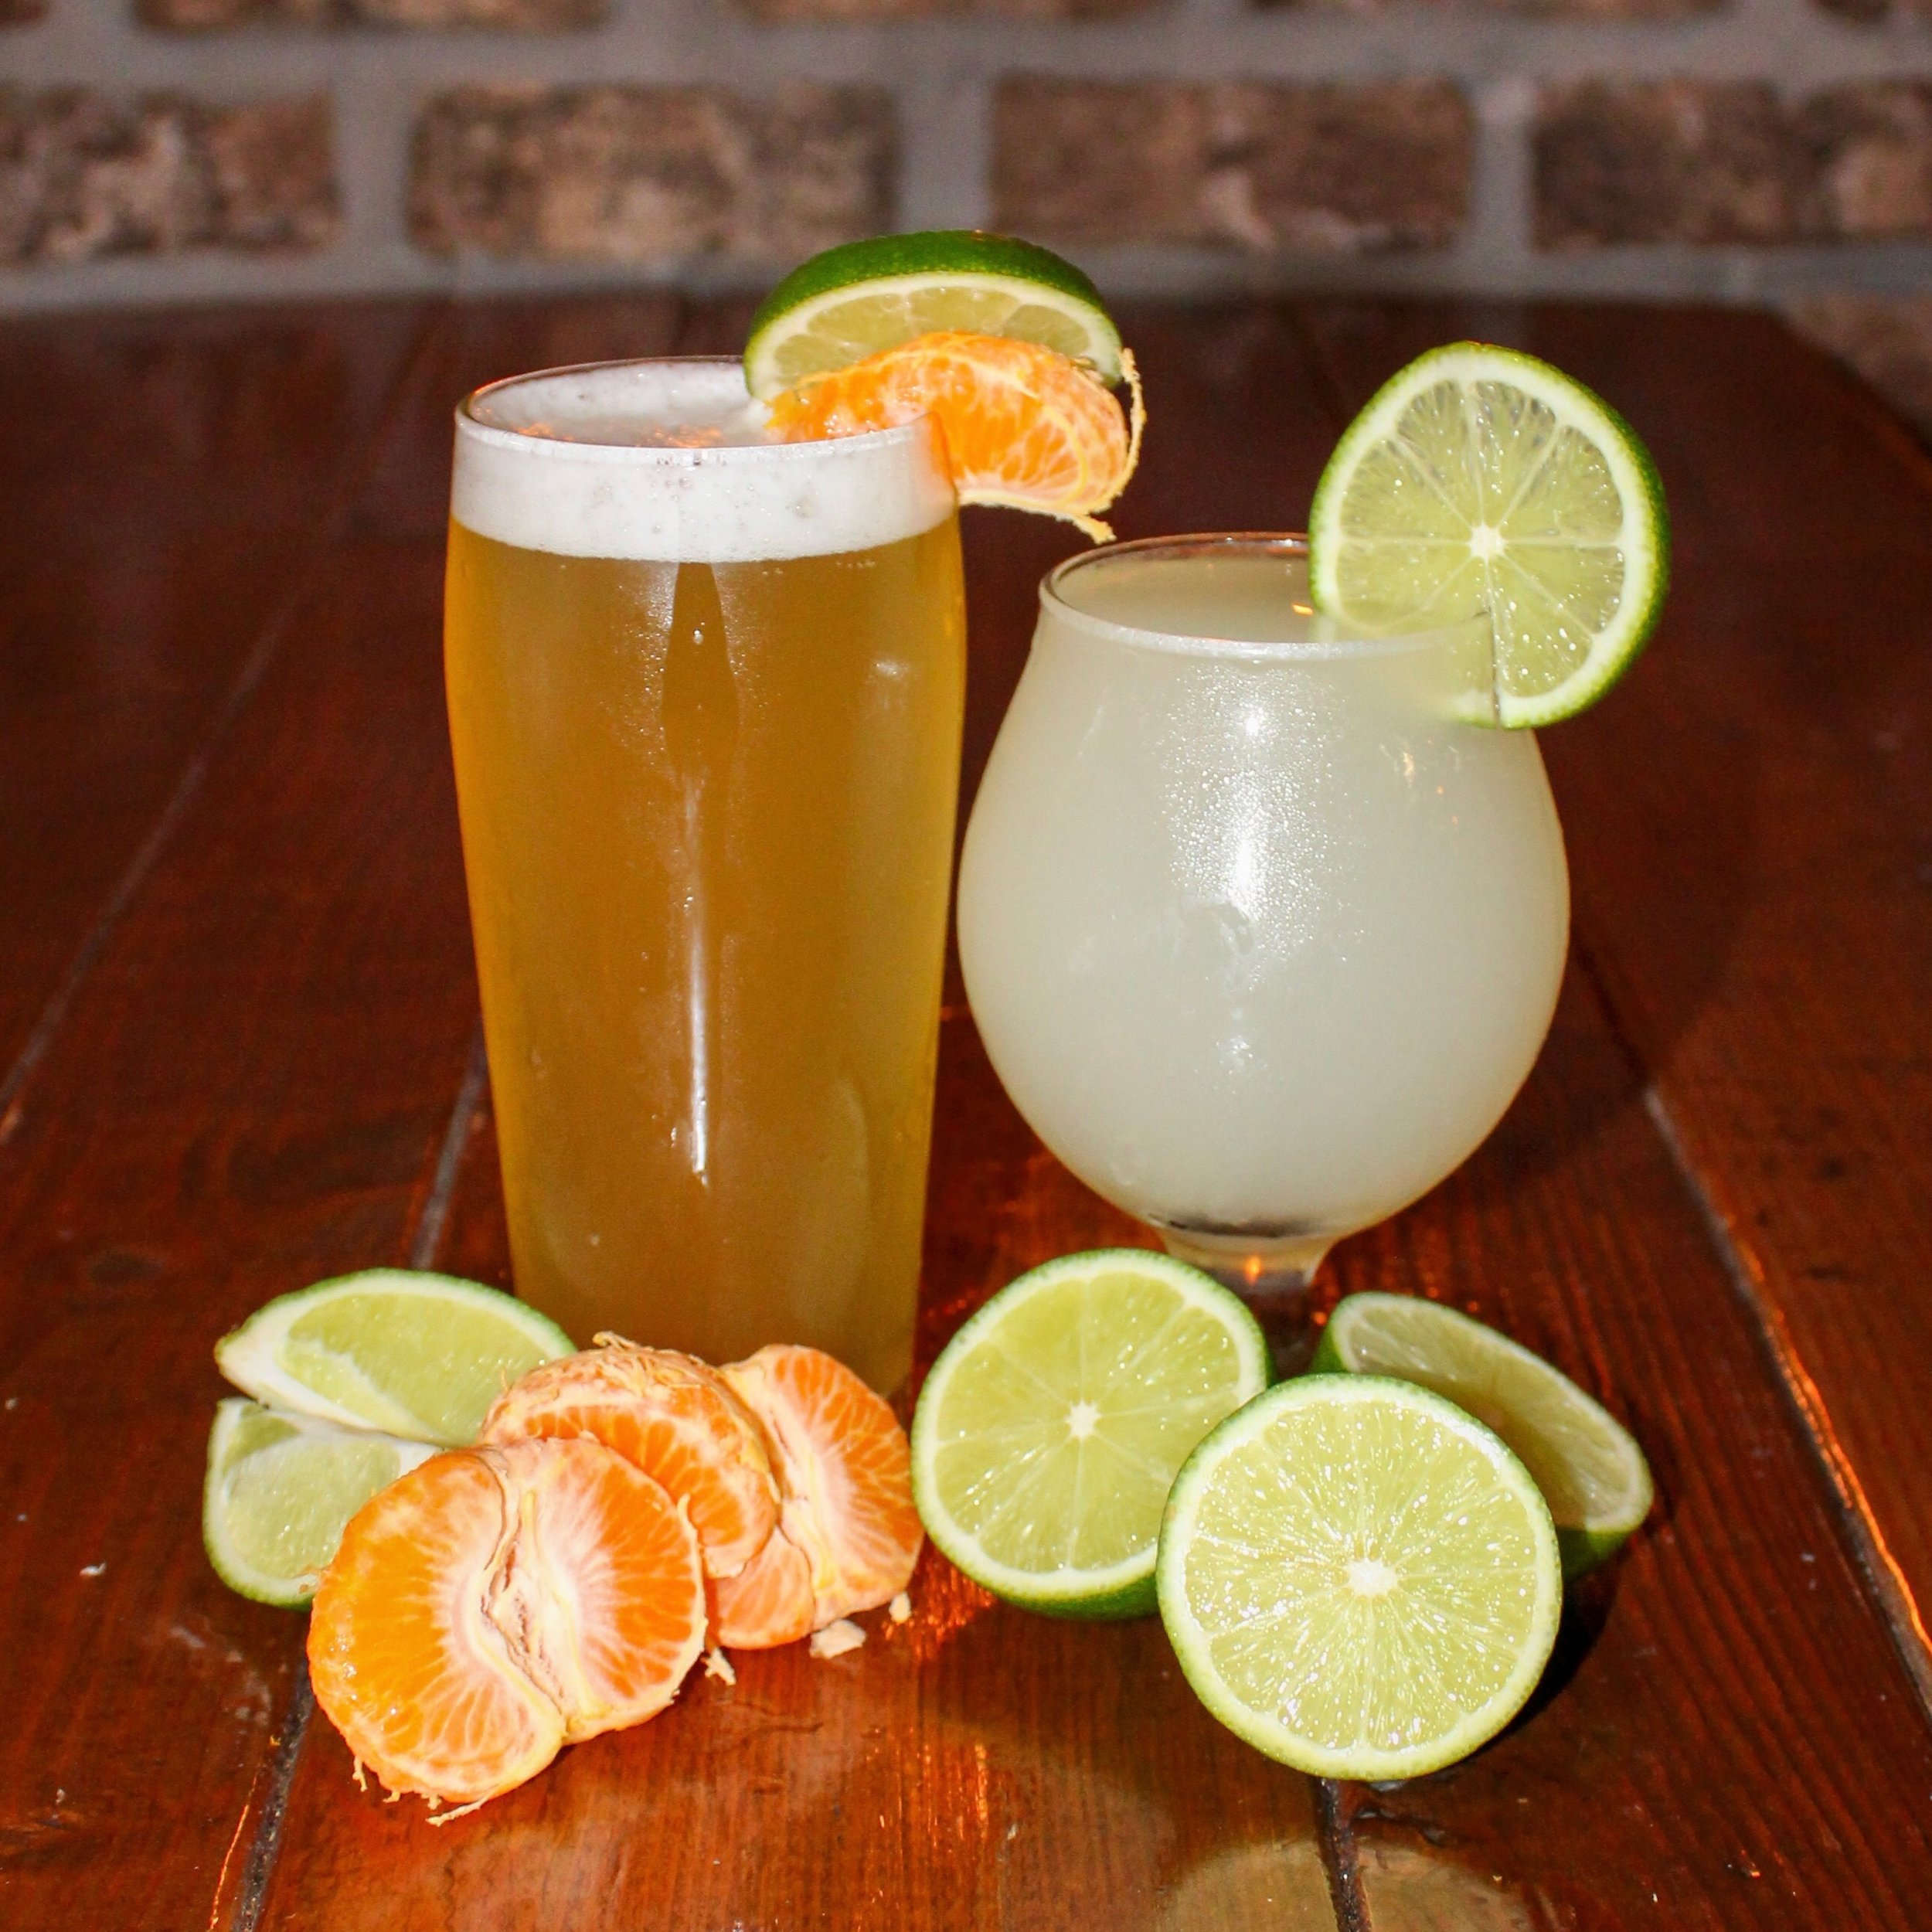 CINCO DE MAYO 🍻

Looking for a chill Sunday Funday Cinco? We&rsquo;ve got you covered!

We&rsquo;re bringing back our fan favorite Lime Seltzer AND Baja Goofy Footed today 🍋&zwj;🟩🍊

𝐋𝐢𝐦𝐞 𝐒𝐞𝐥𝐭𝐳𝐞𝐫 - 5% ABV

𝐁𝐚𝐣𝐚 𝐆𝐨𝐨𝐟𝐲 𝐅𝐨𝐨𝐭𝐞